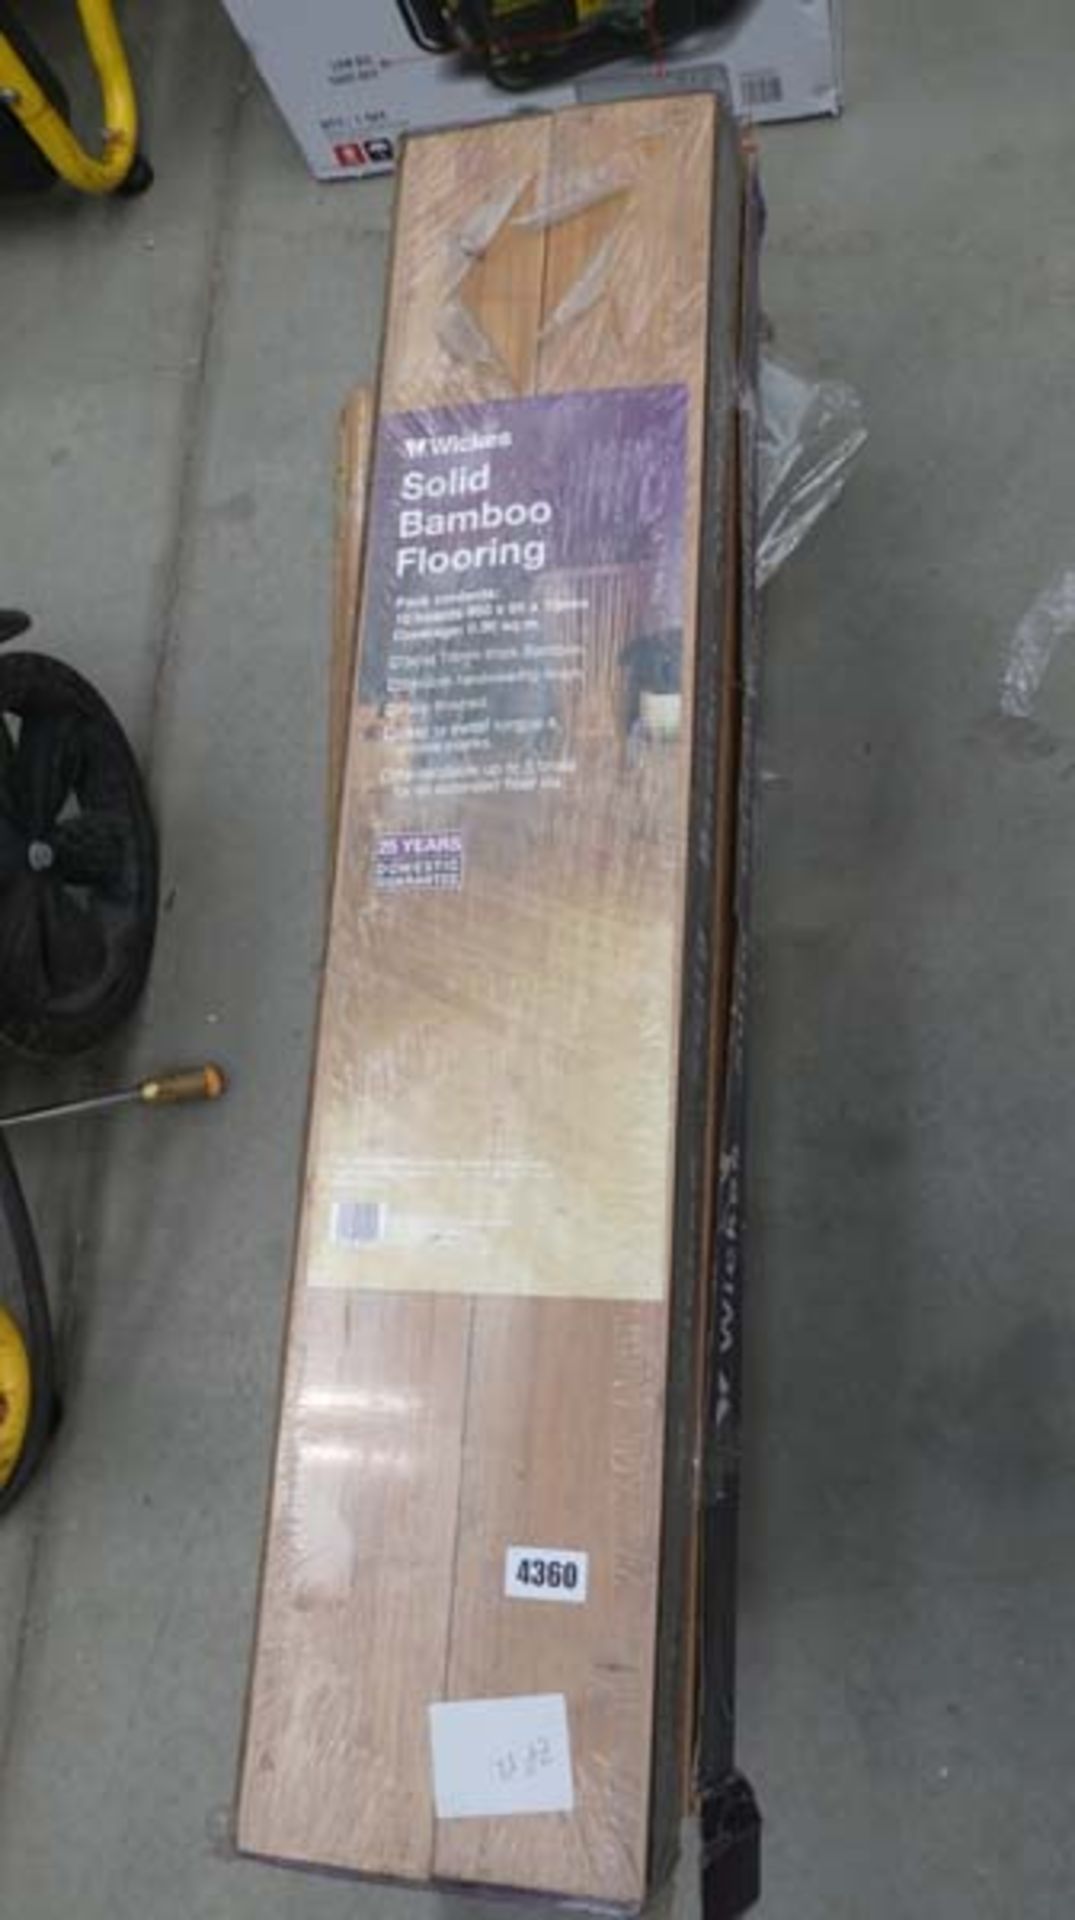 5 packs of Wickes bamboo flooring and some edging strips